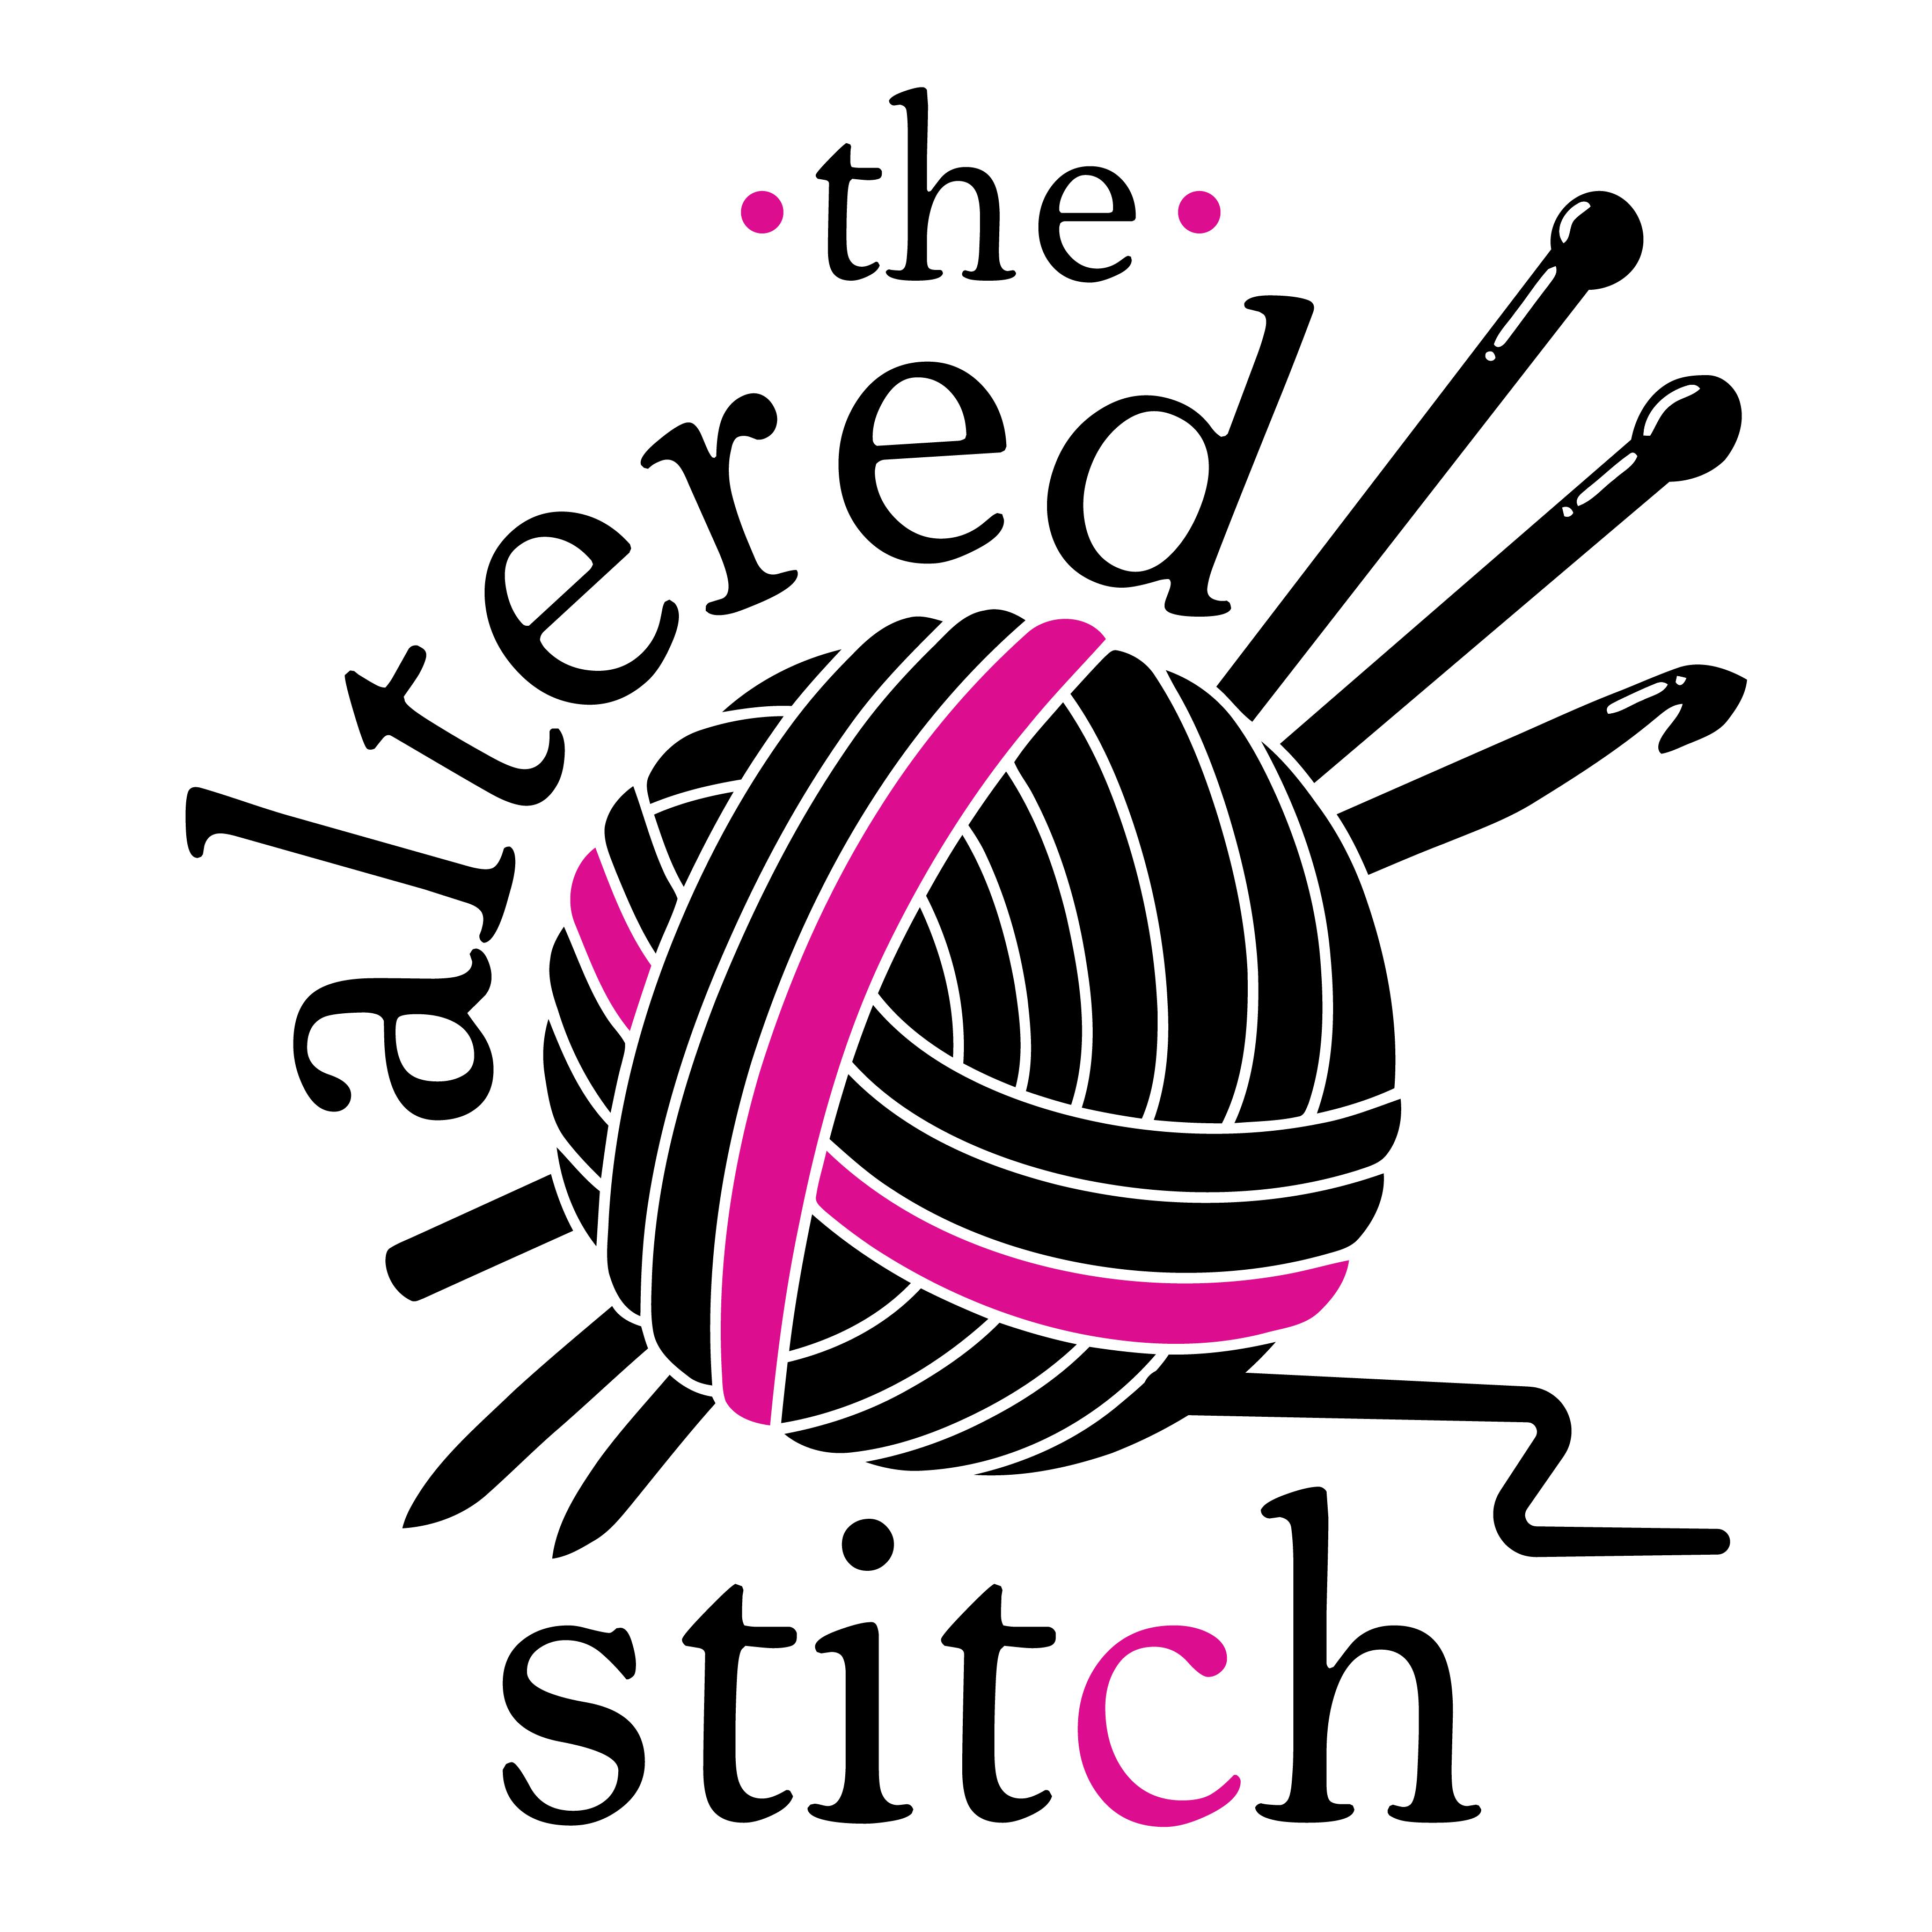 The Altered Stitch